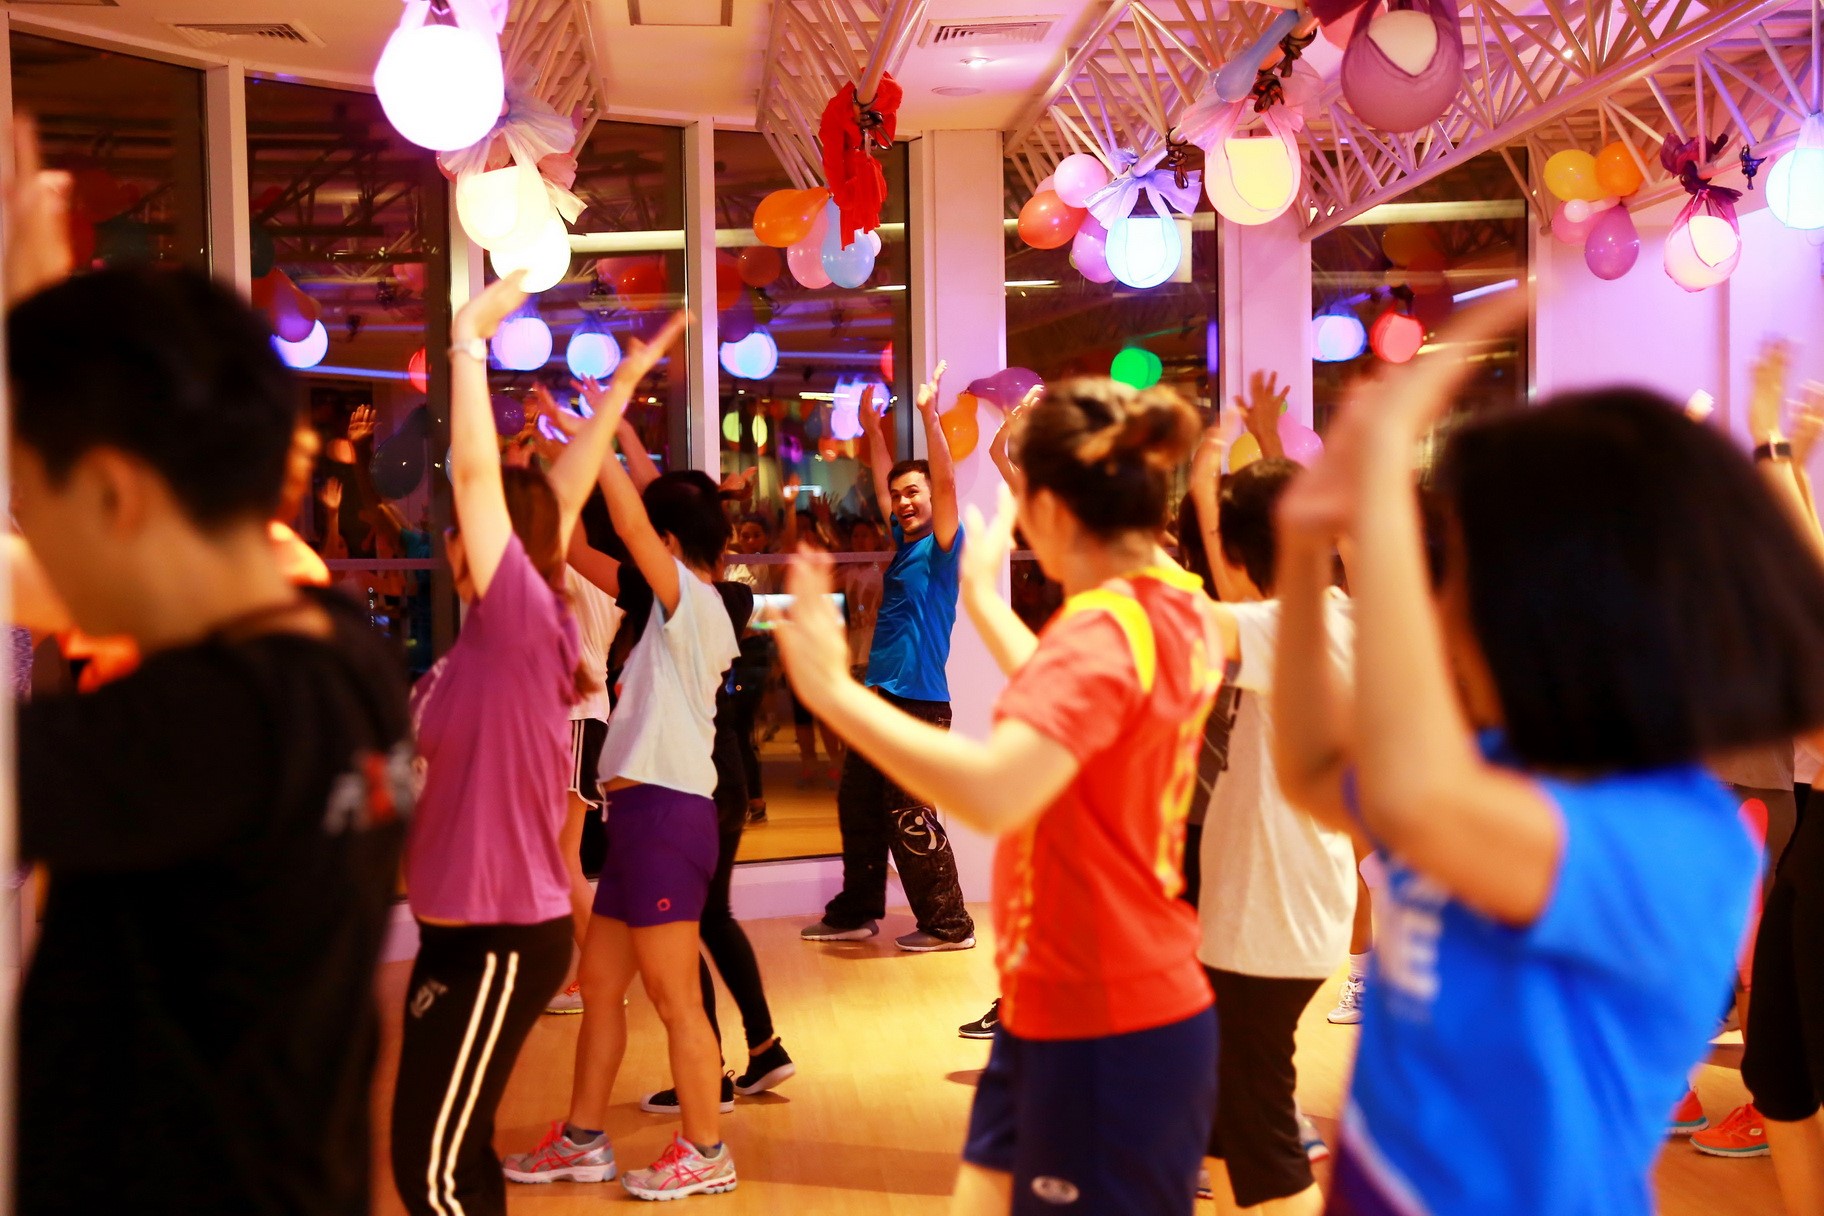 Get Fit and Have Fun with Zumba at LifeStyles on 26